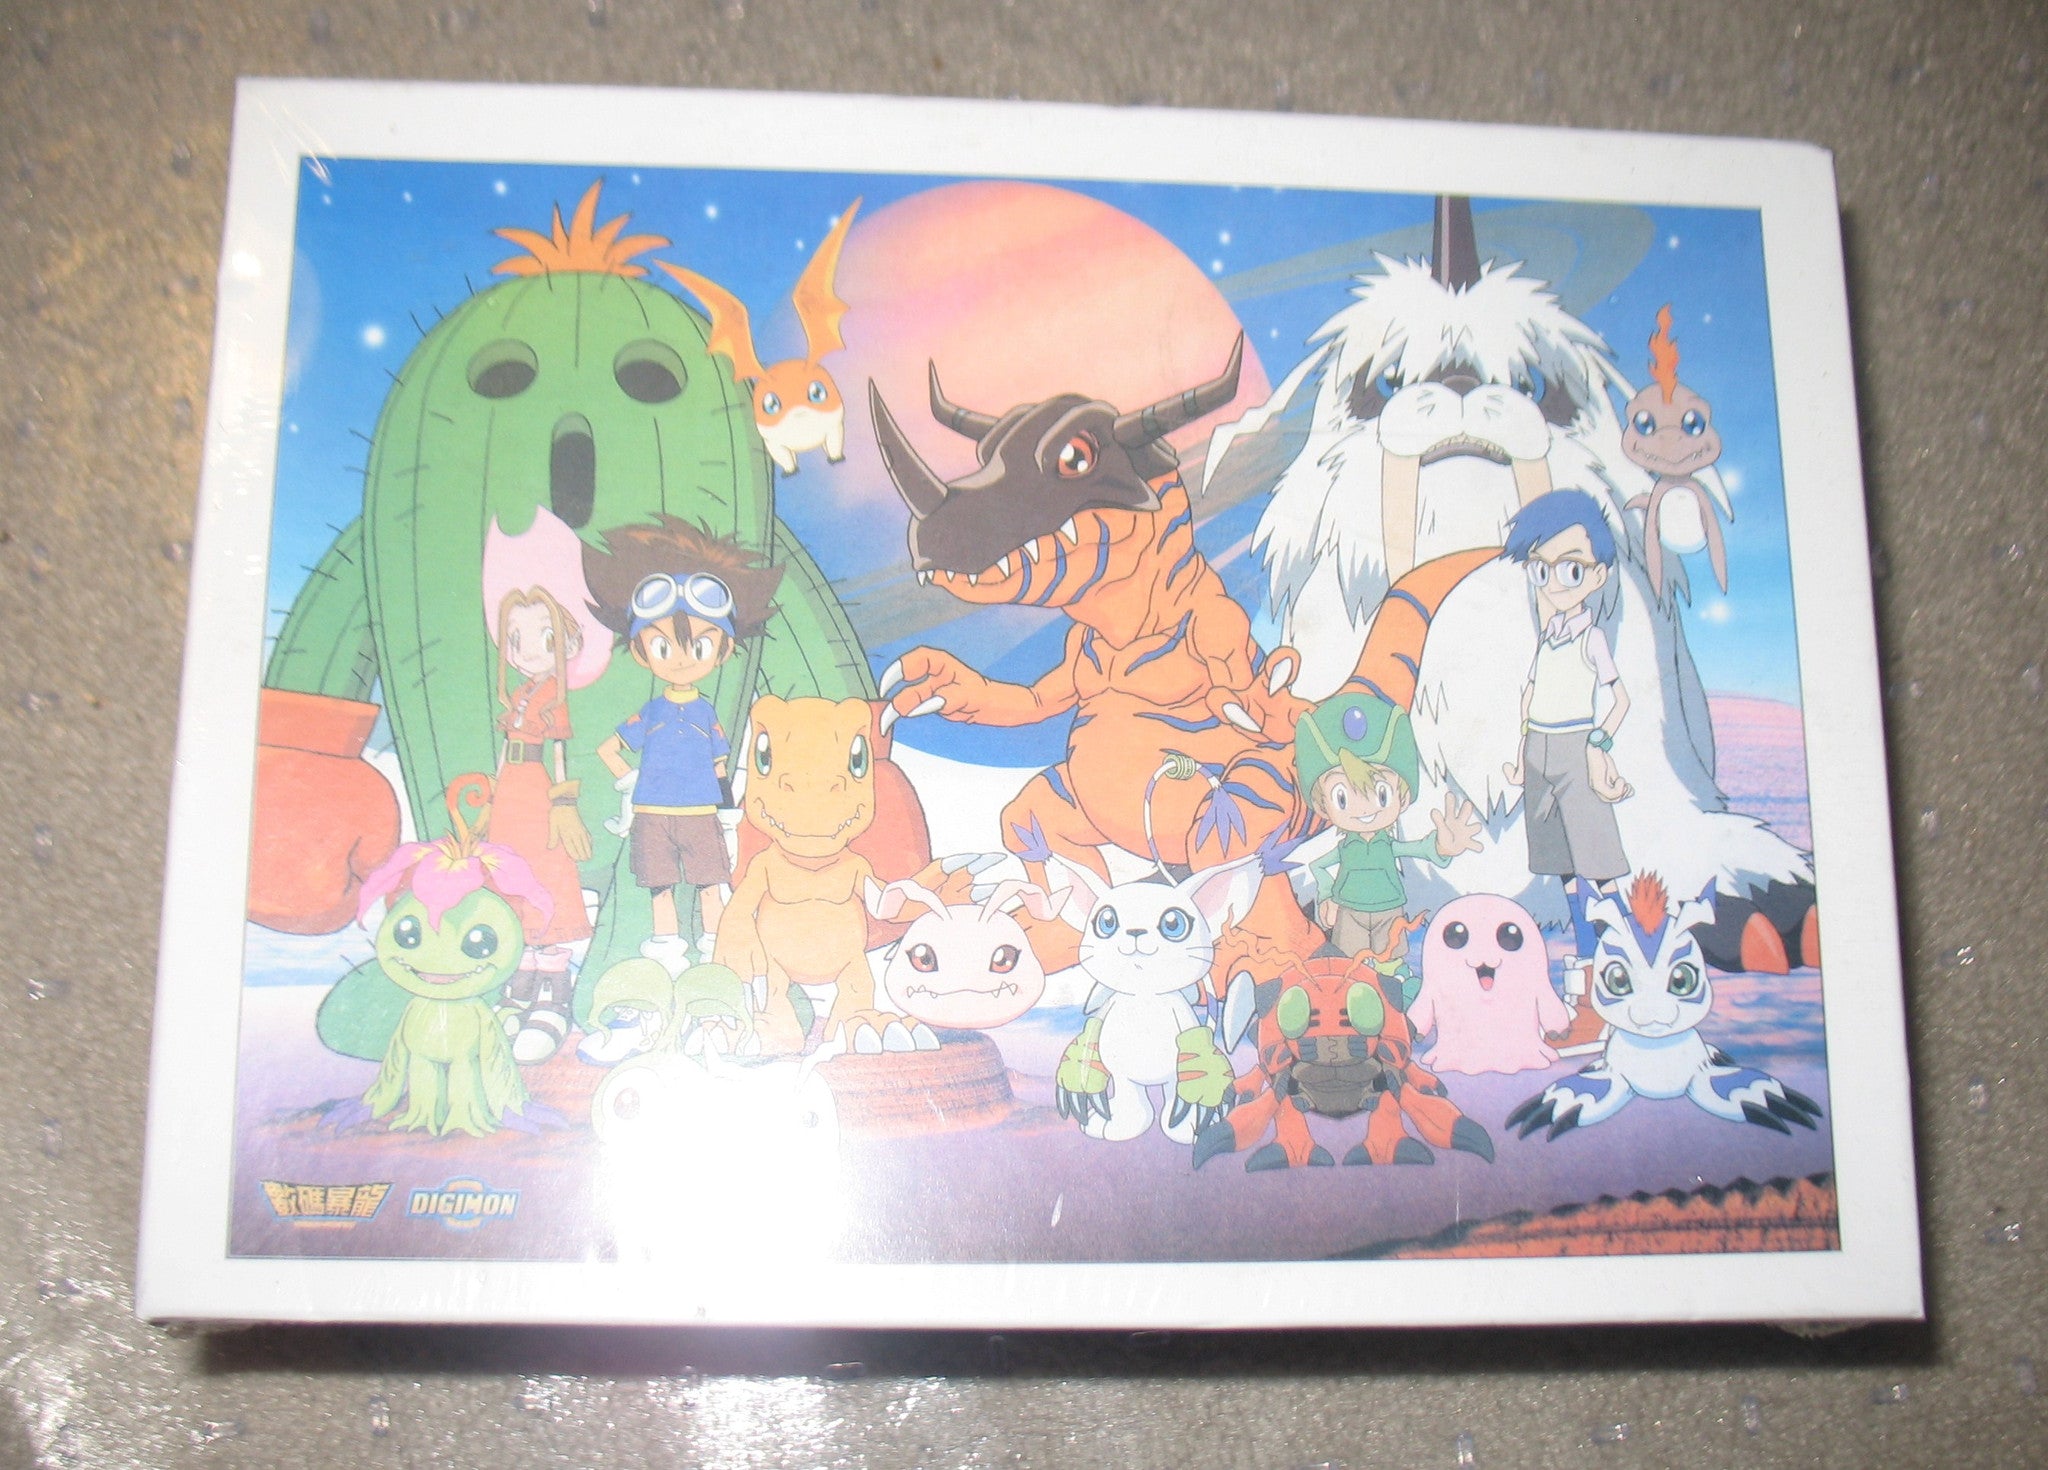 G036 Digimon Digital Monsters Anime Puzzle Brand New Sealed 300 pcs.